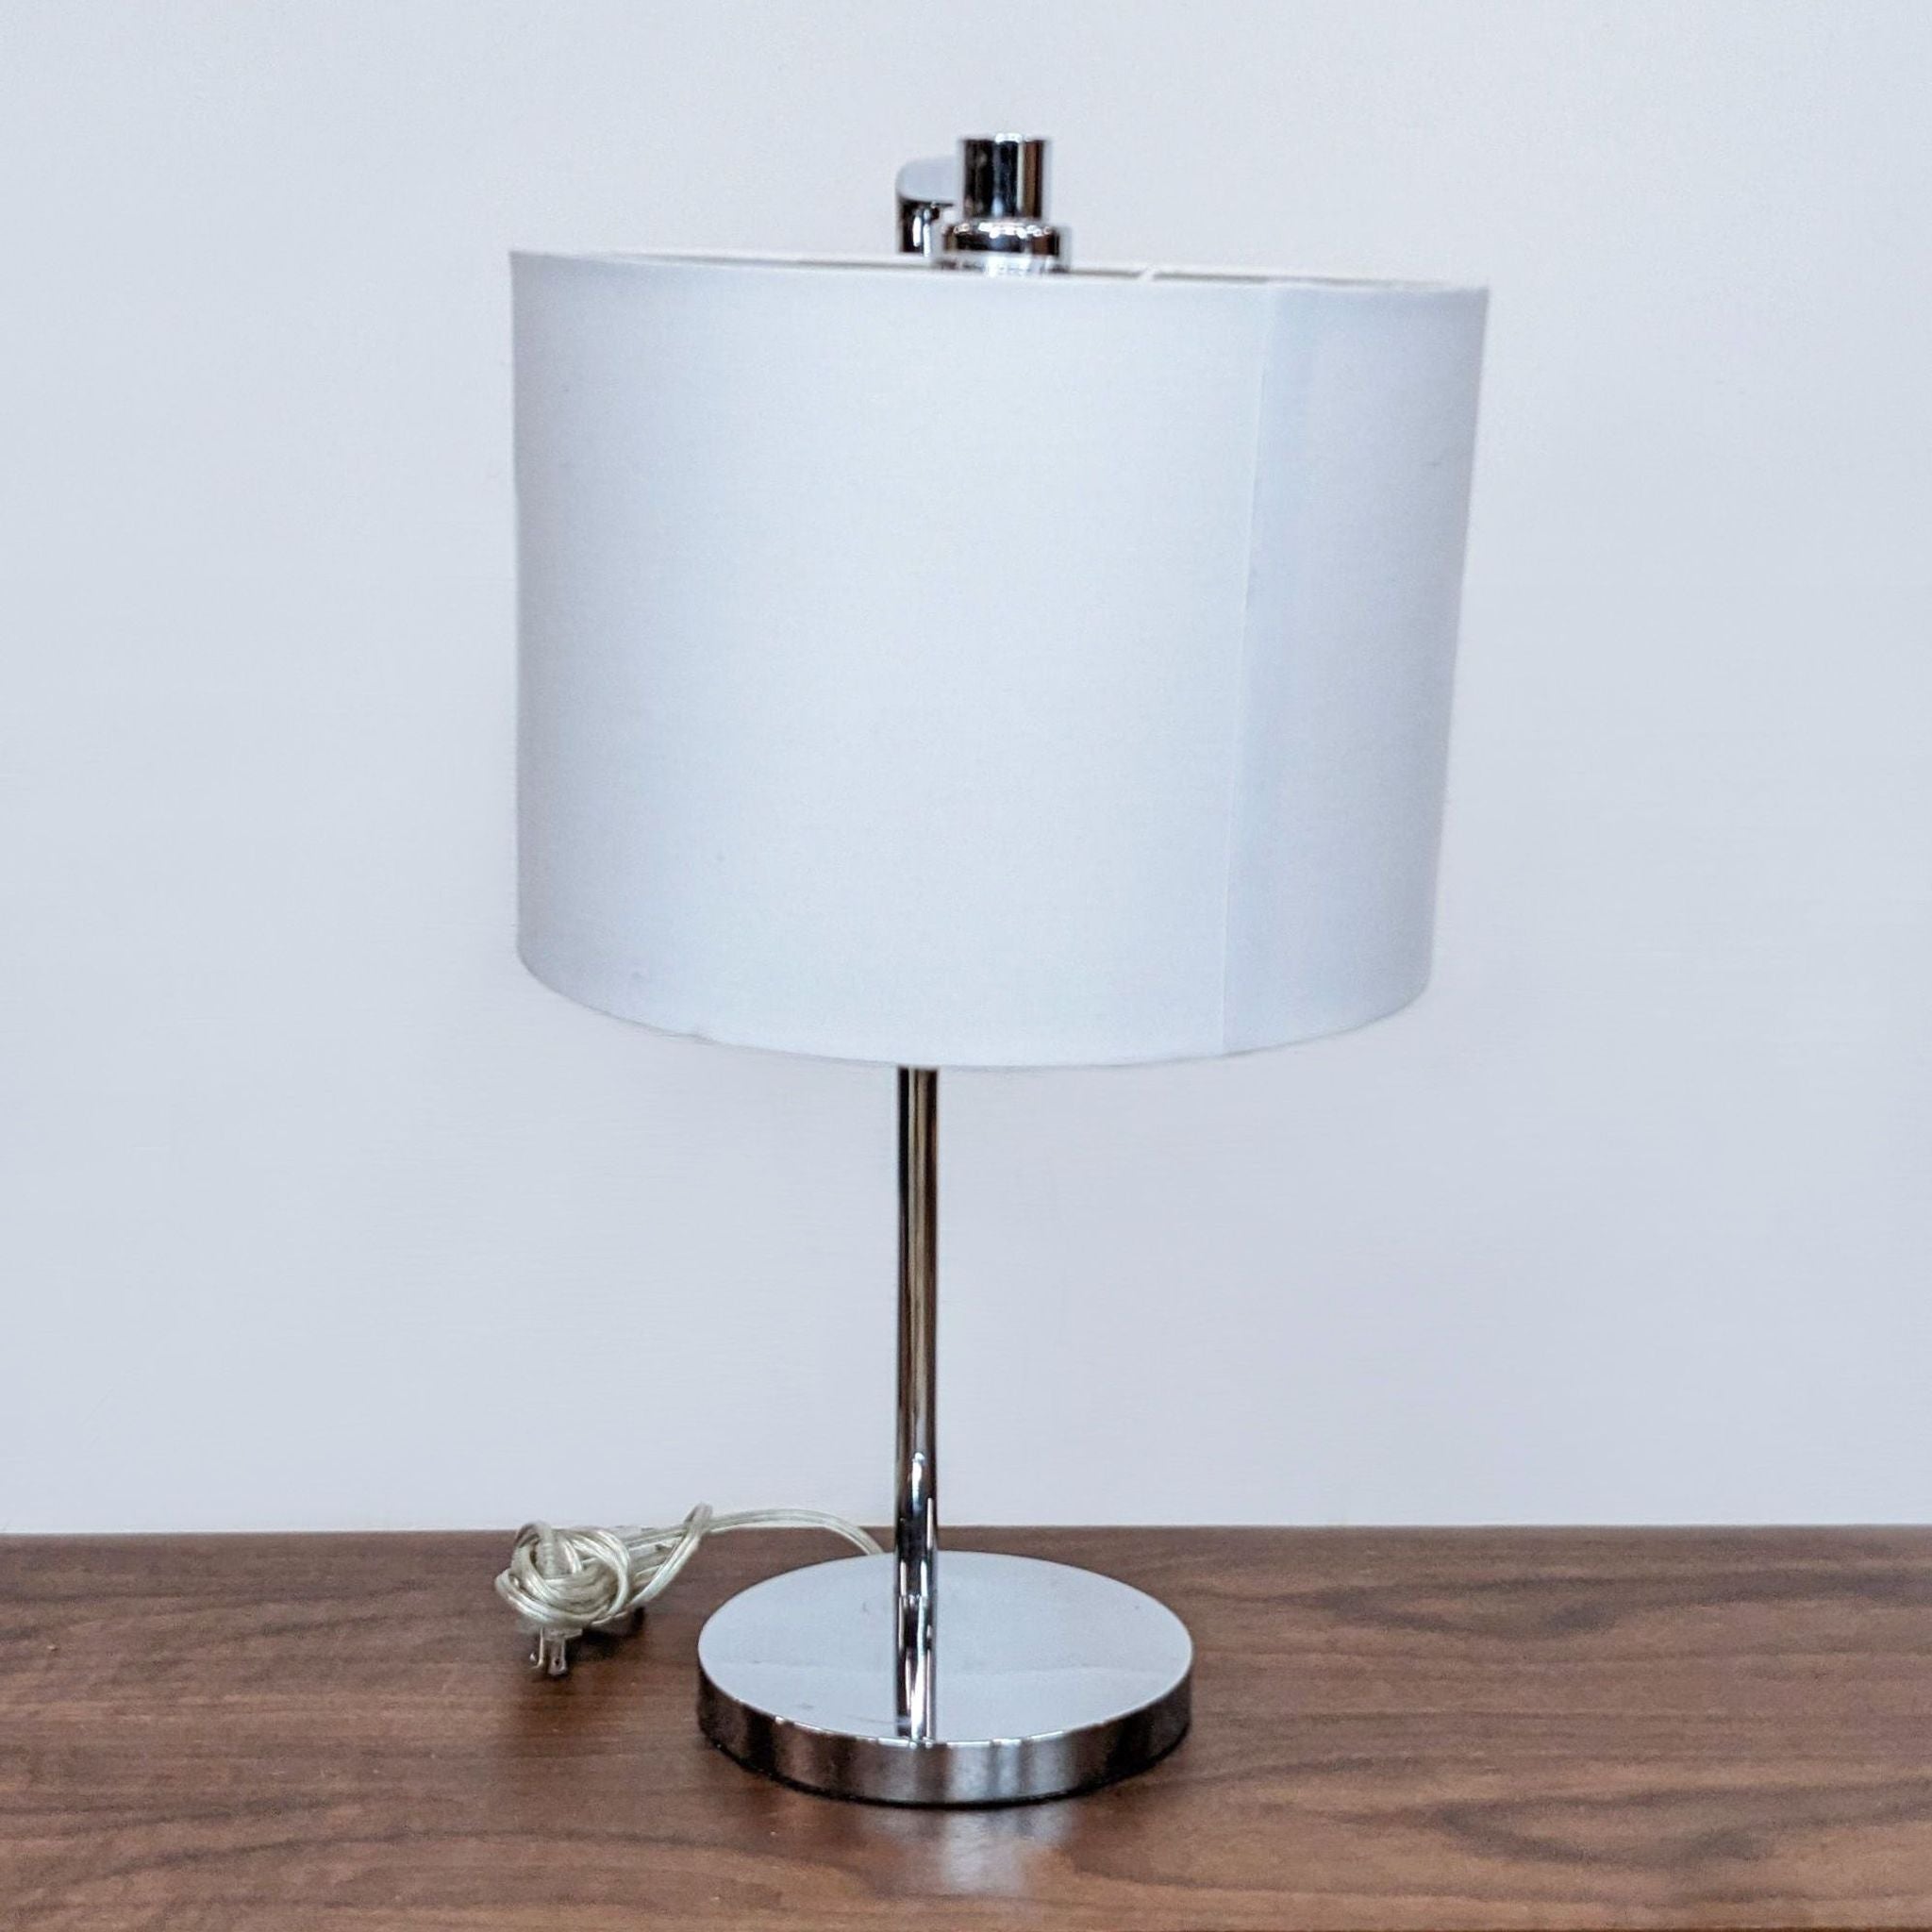 Minimalist Reperch desk lamp with a cylindrical white lampshade and shiny metal stand, power cord visible.